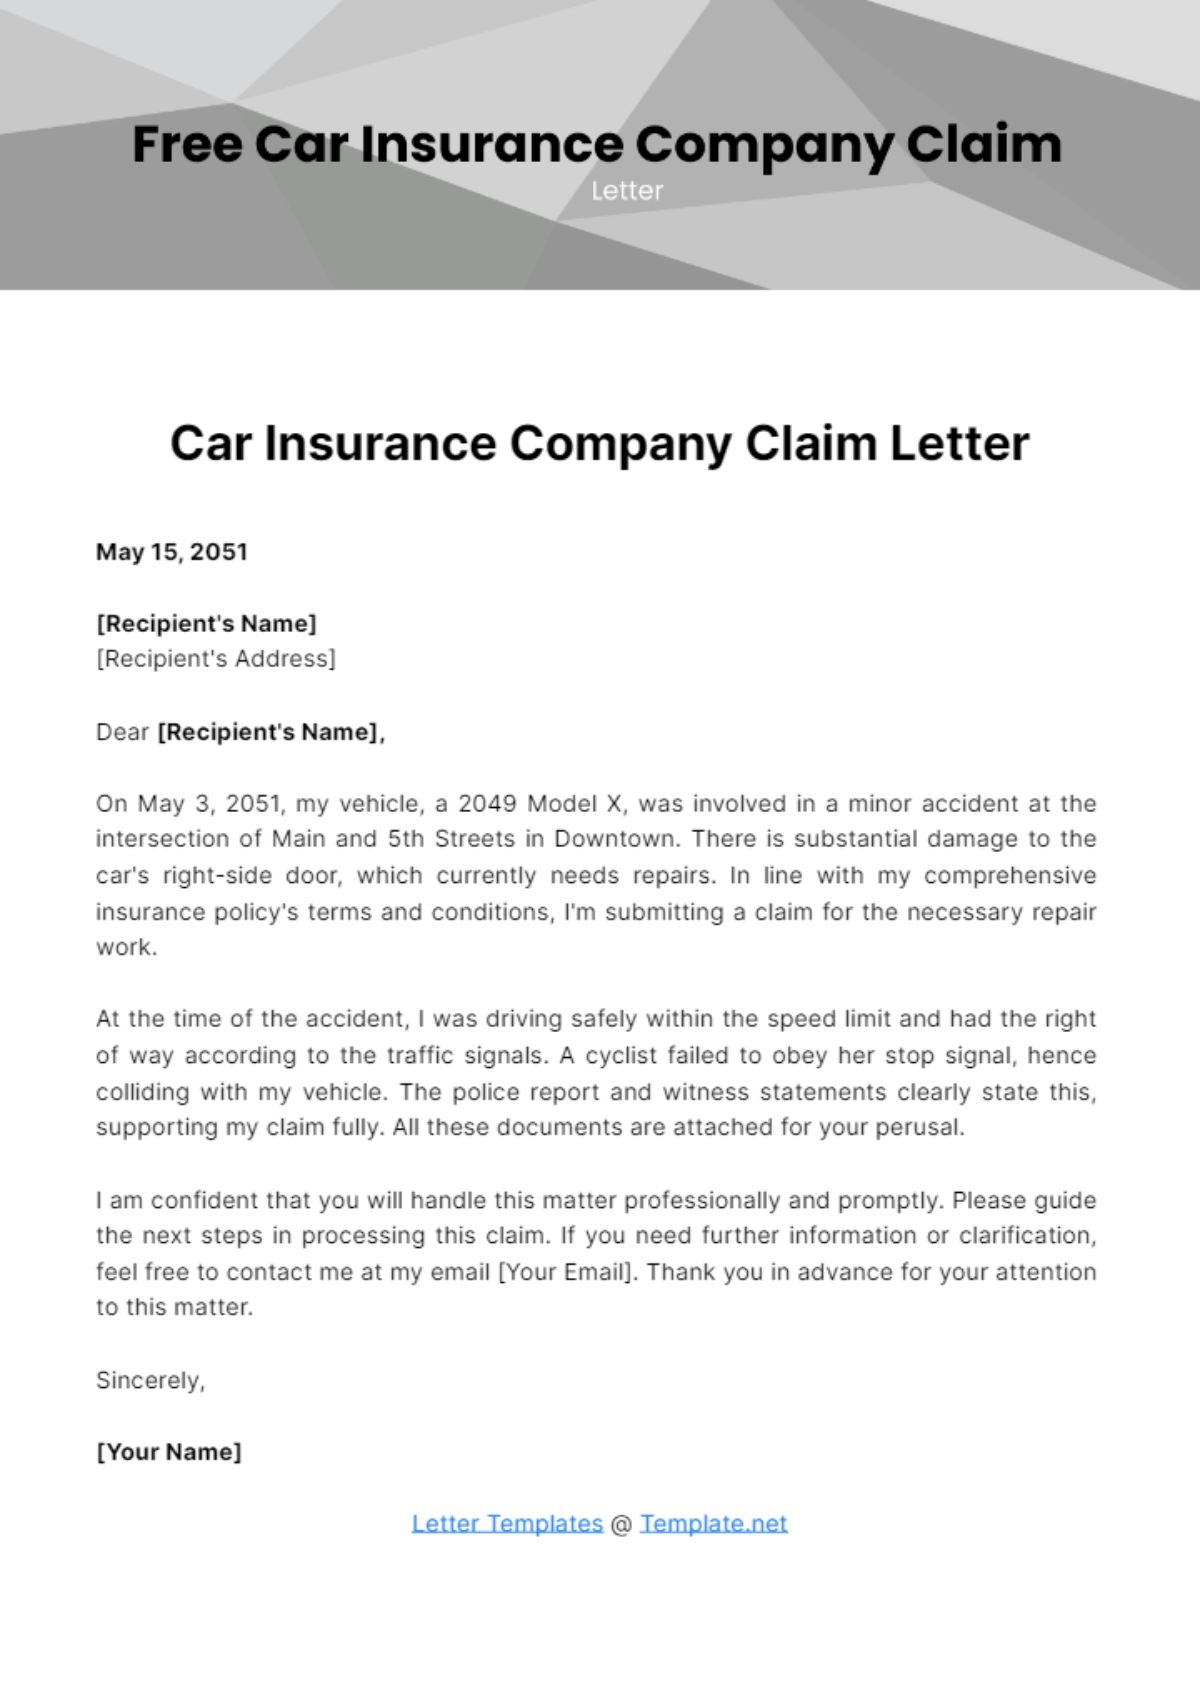 Free Car Insurance Company Claim Letter Template